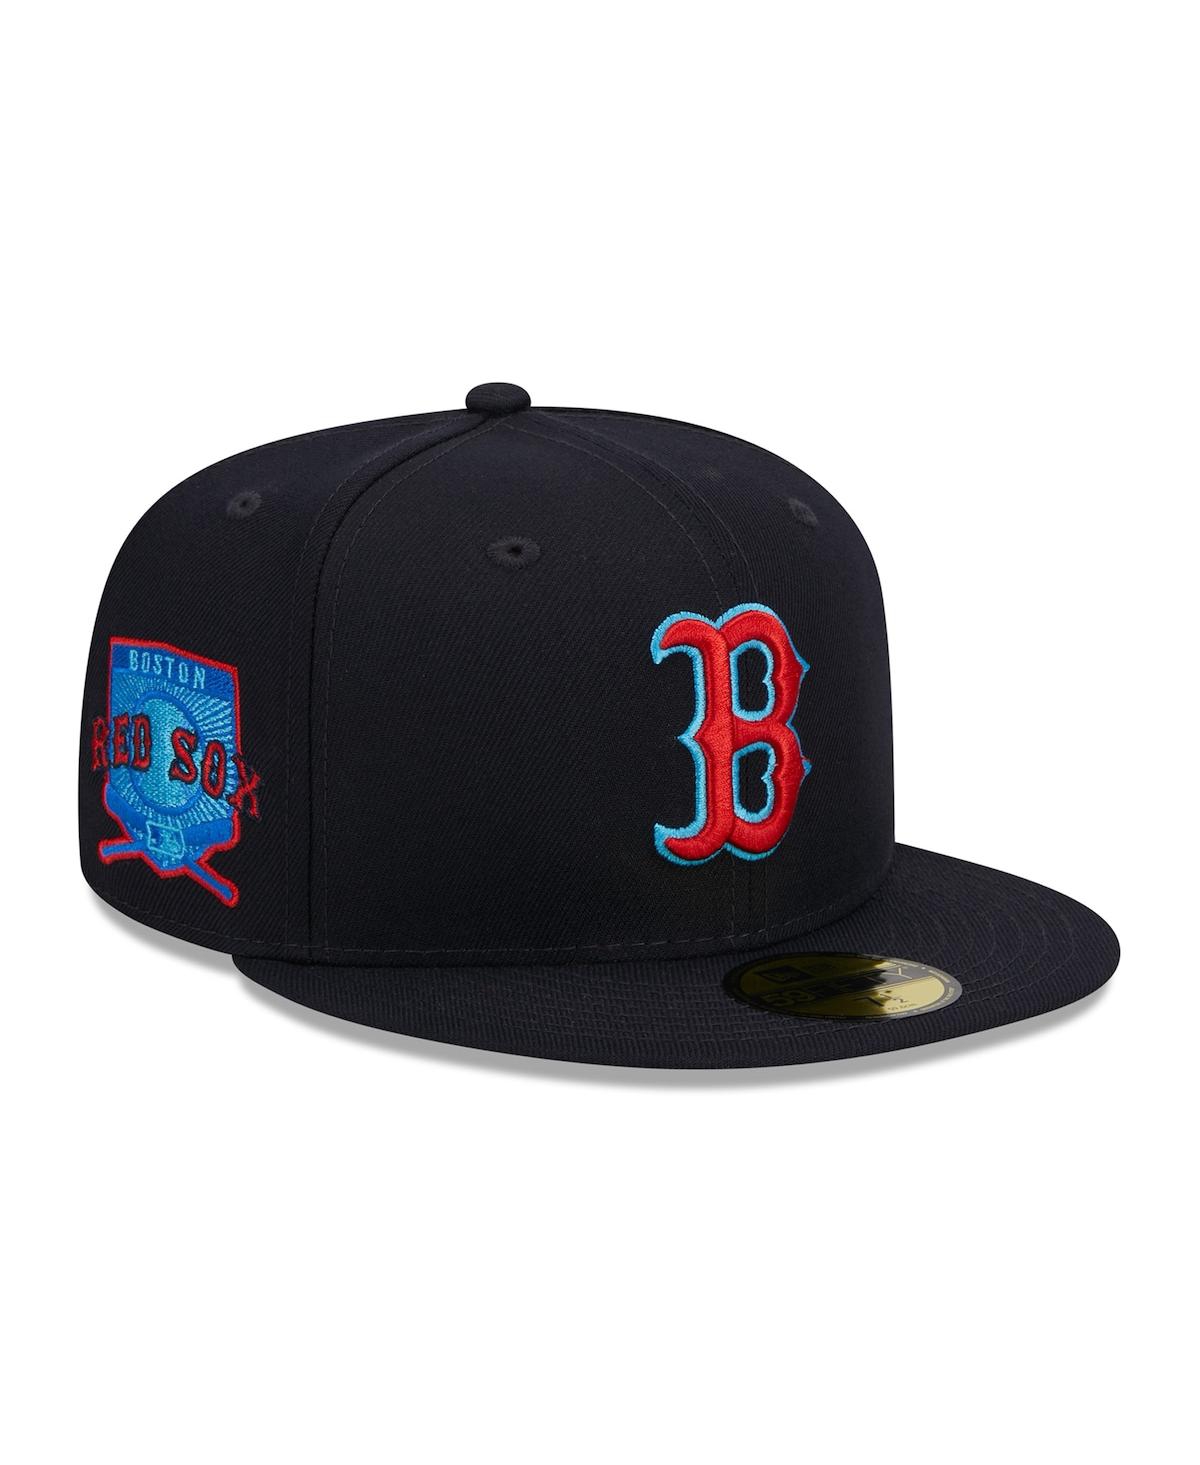 Save up to 65% on team hats, jerseys and more at the MLB Shop ahead of  Father's Day 2023